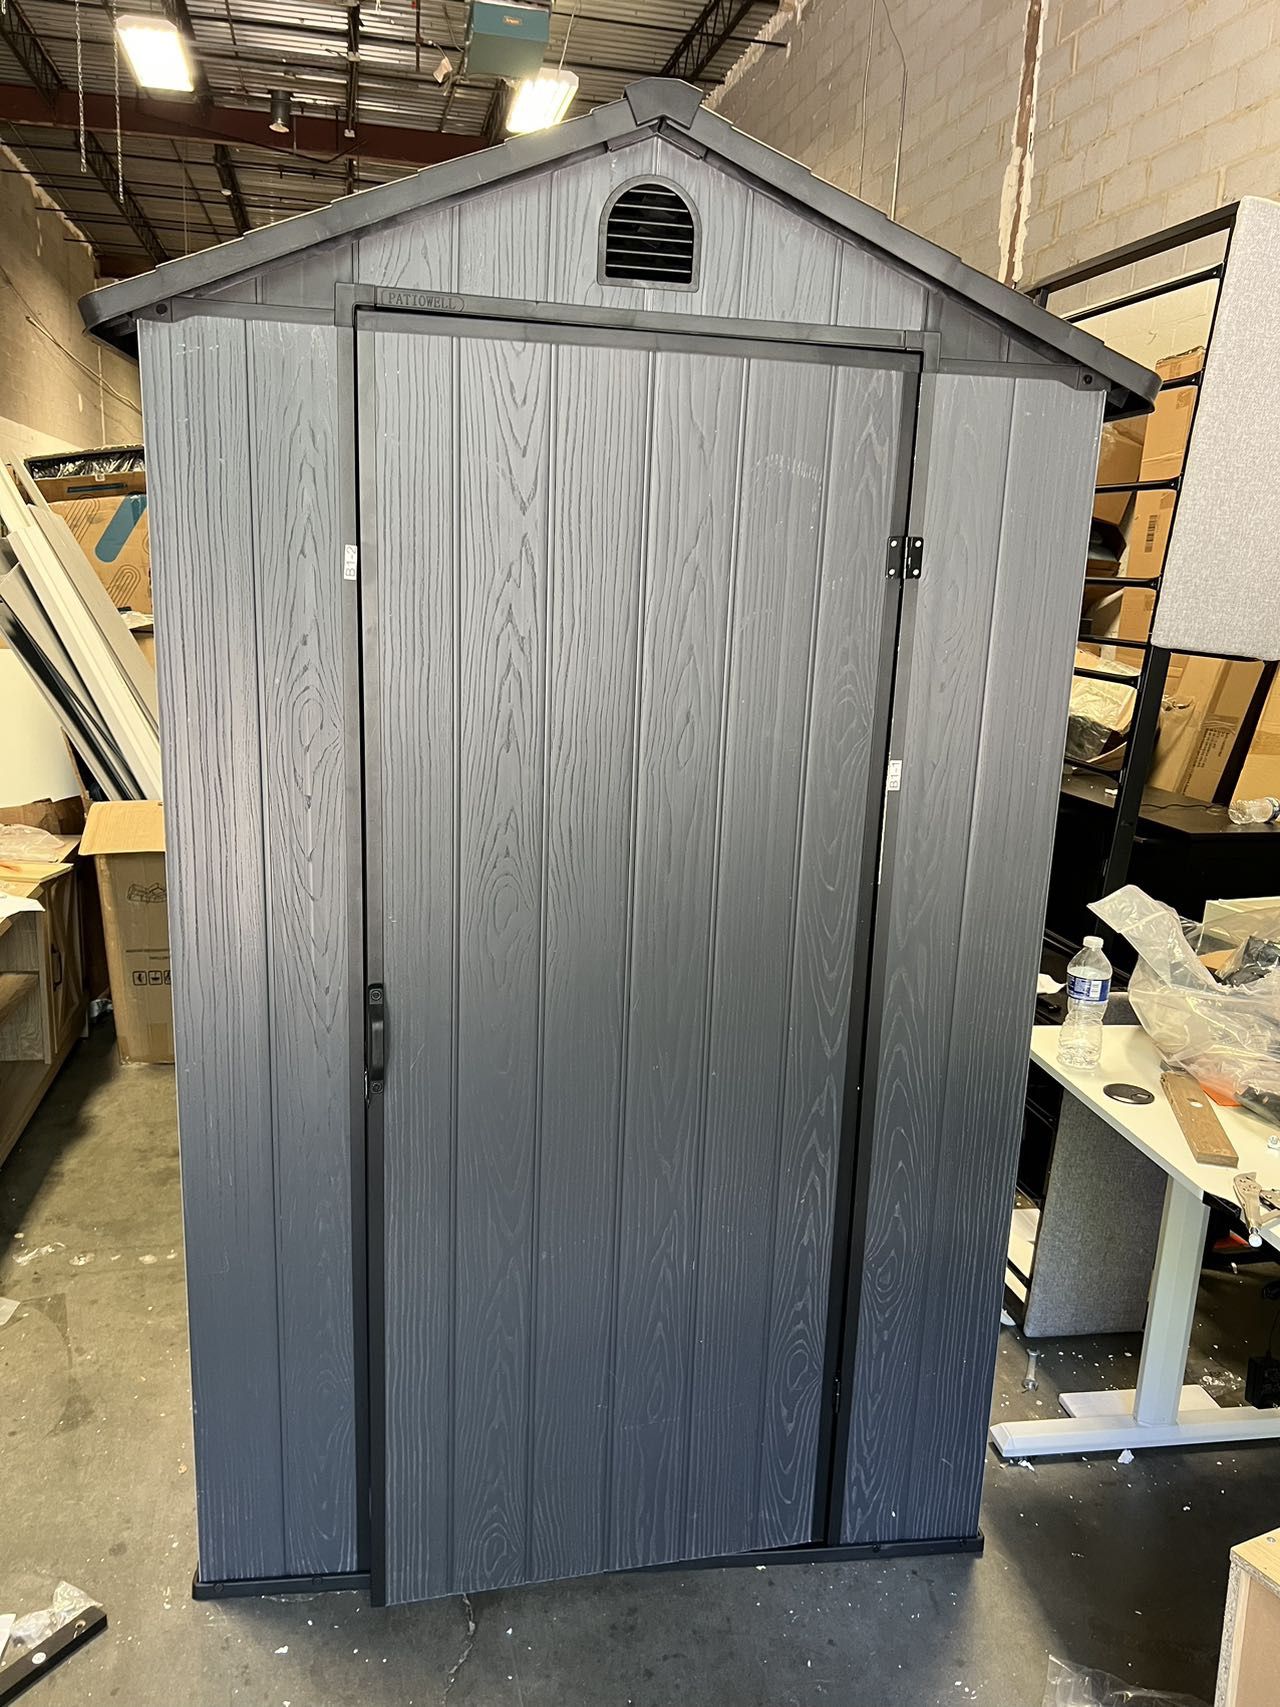 Patiowell 4x6 Plastic Storage Shed Pro( With Floor)